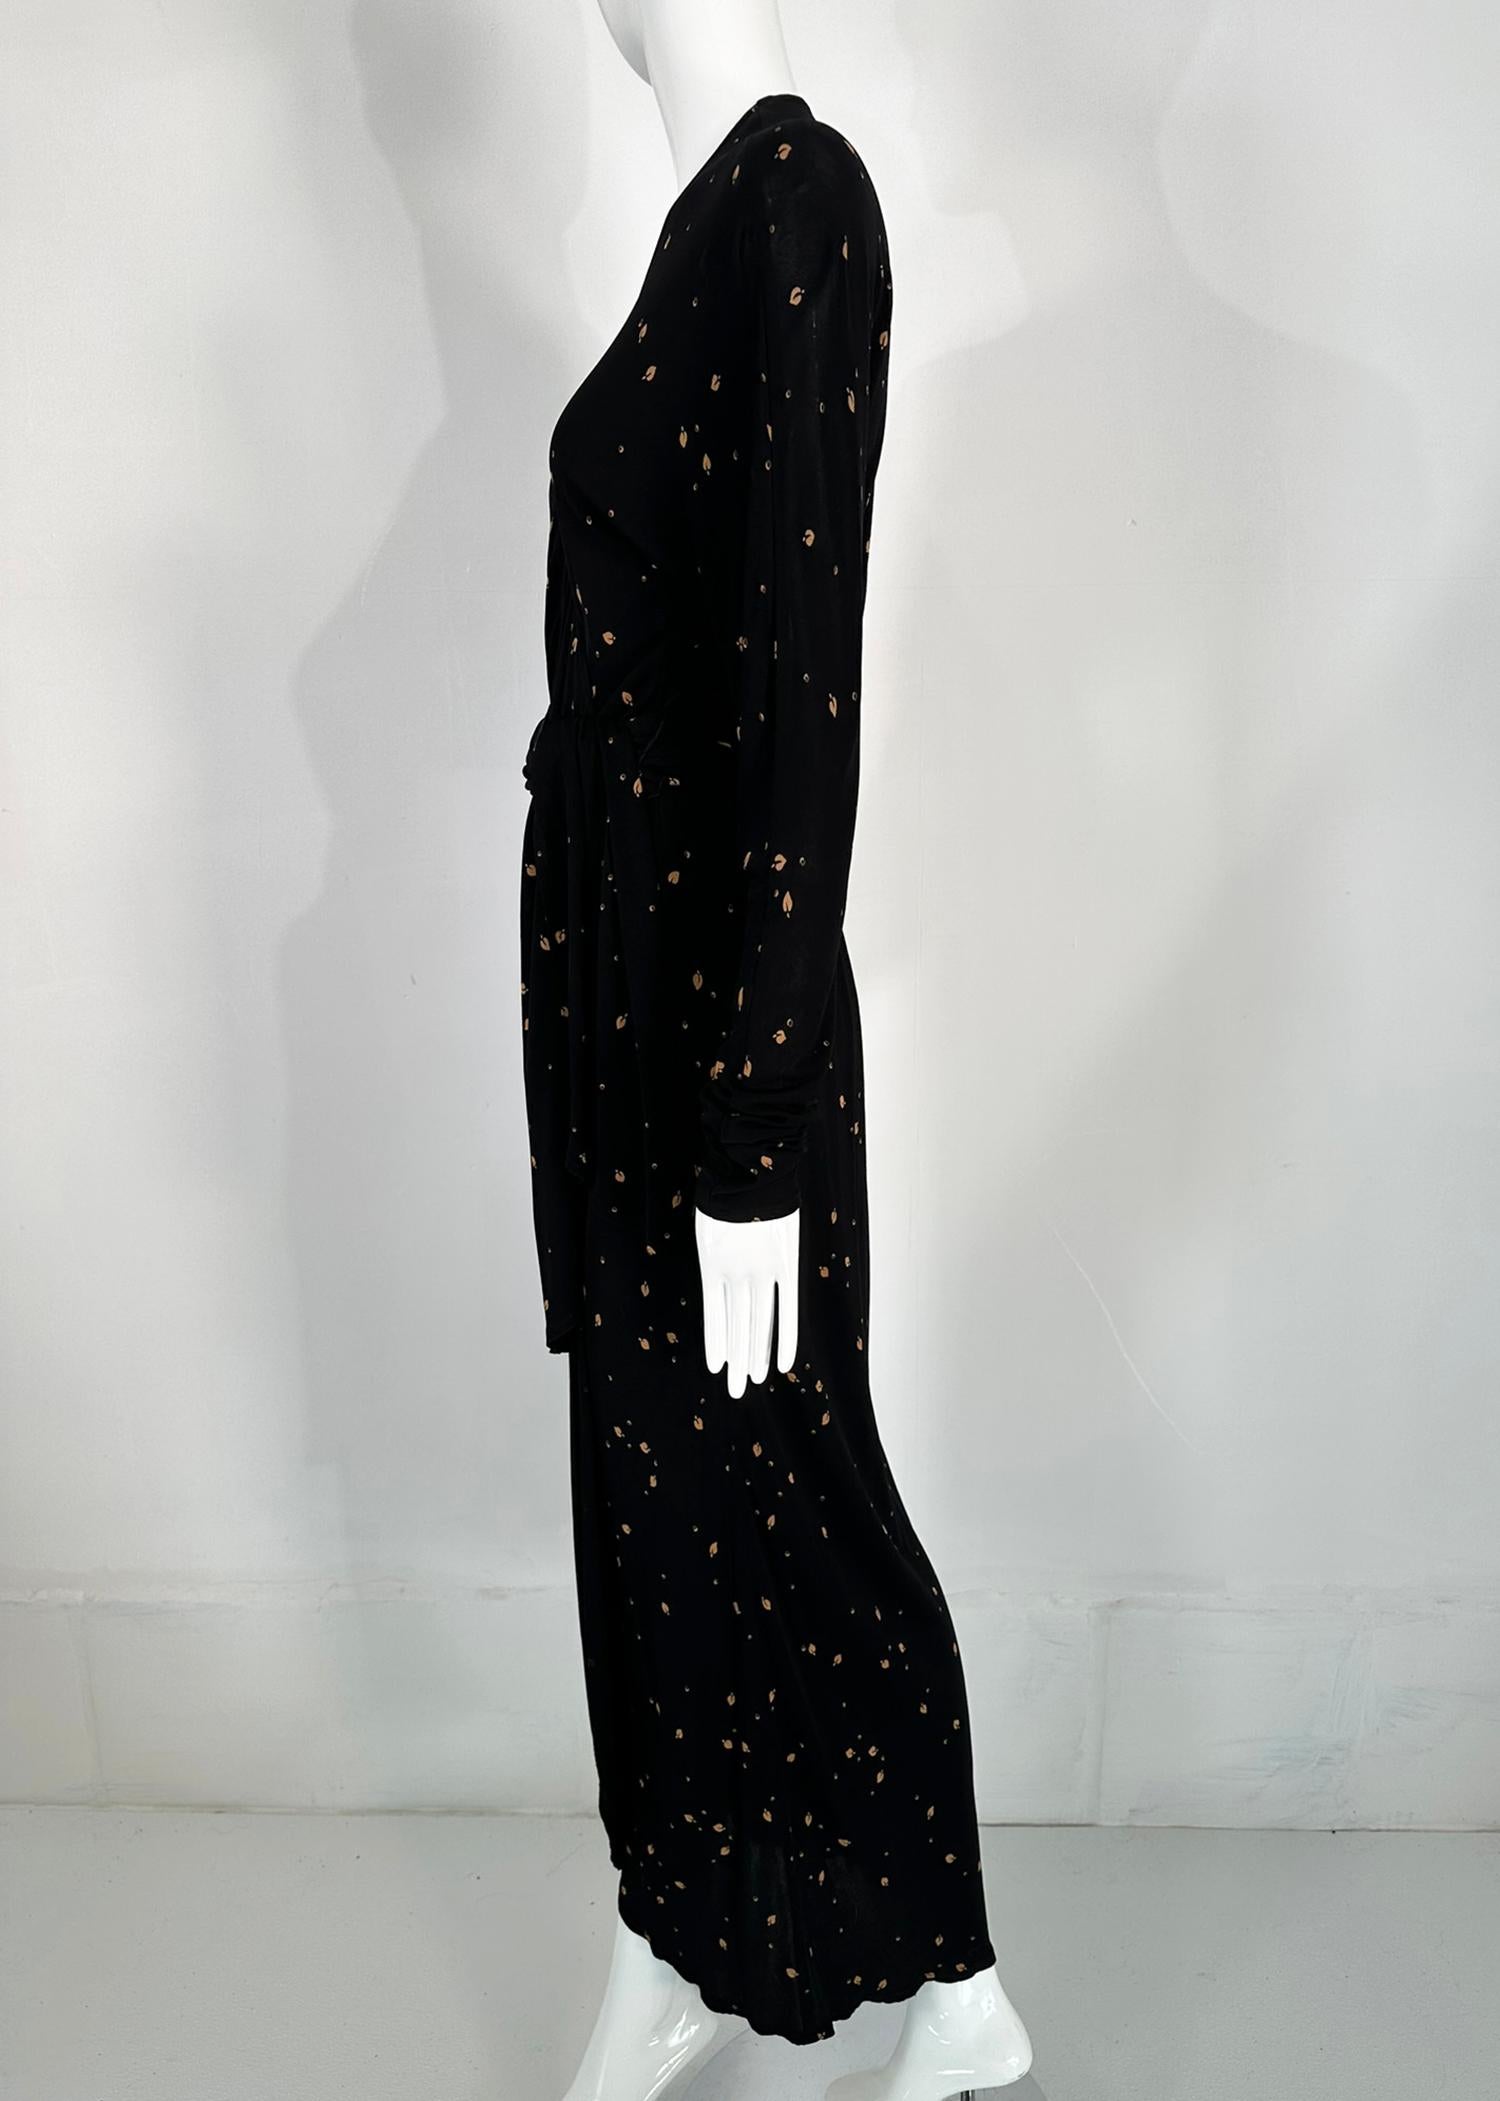 Jaeger 1970s Gold Leaf Printed Black Rayon Open Back Maxi Wrap Dress UK 8  In Good Condition For Sale In West Palm Beach, FL